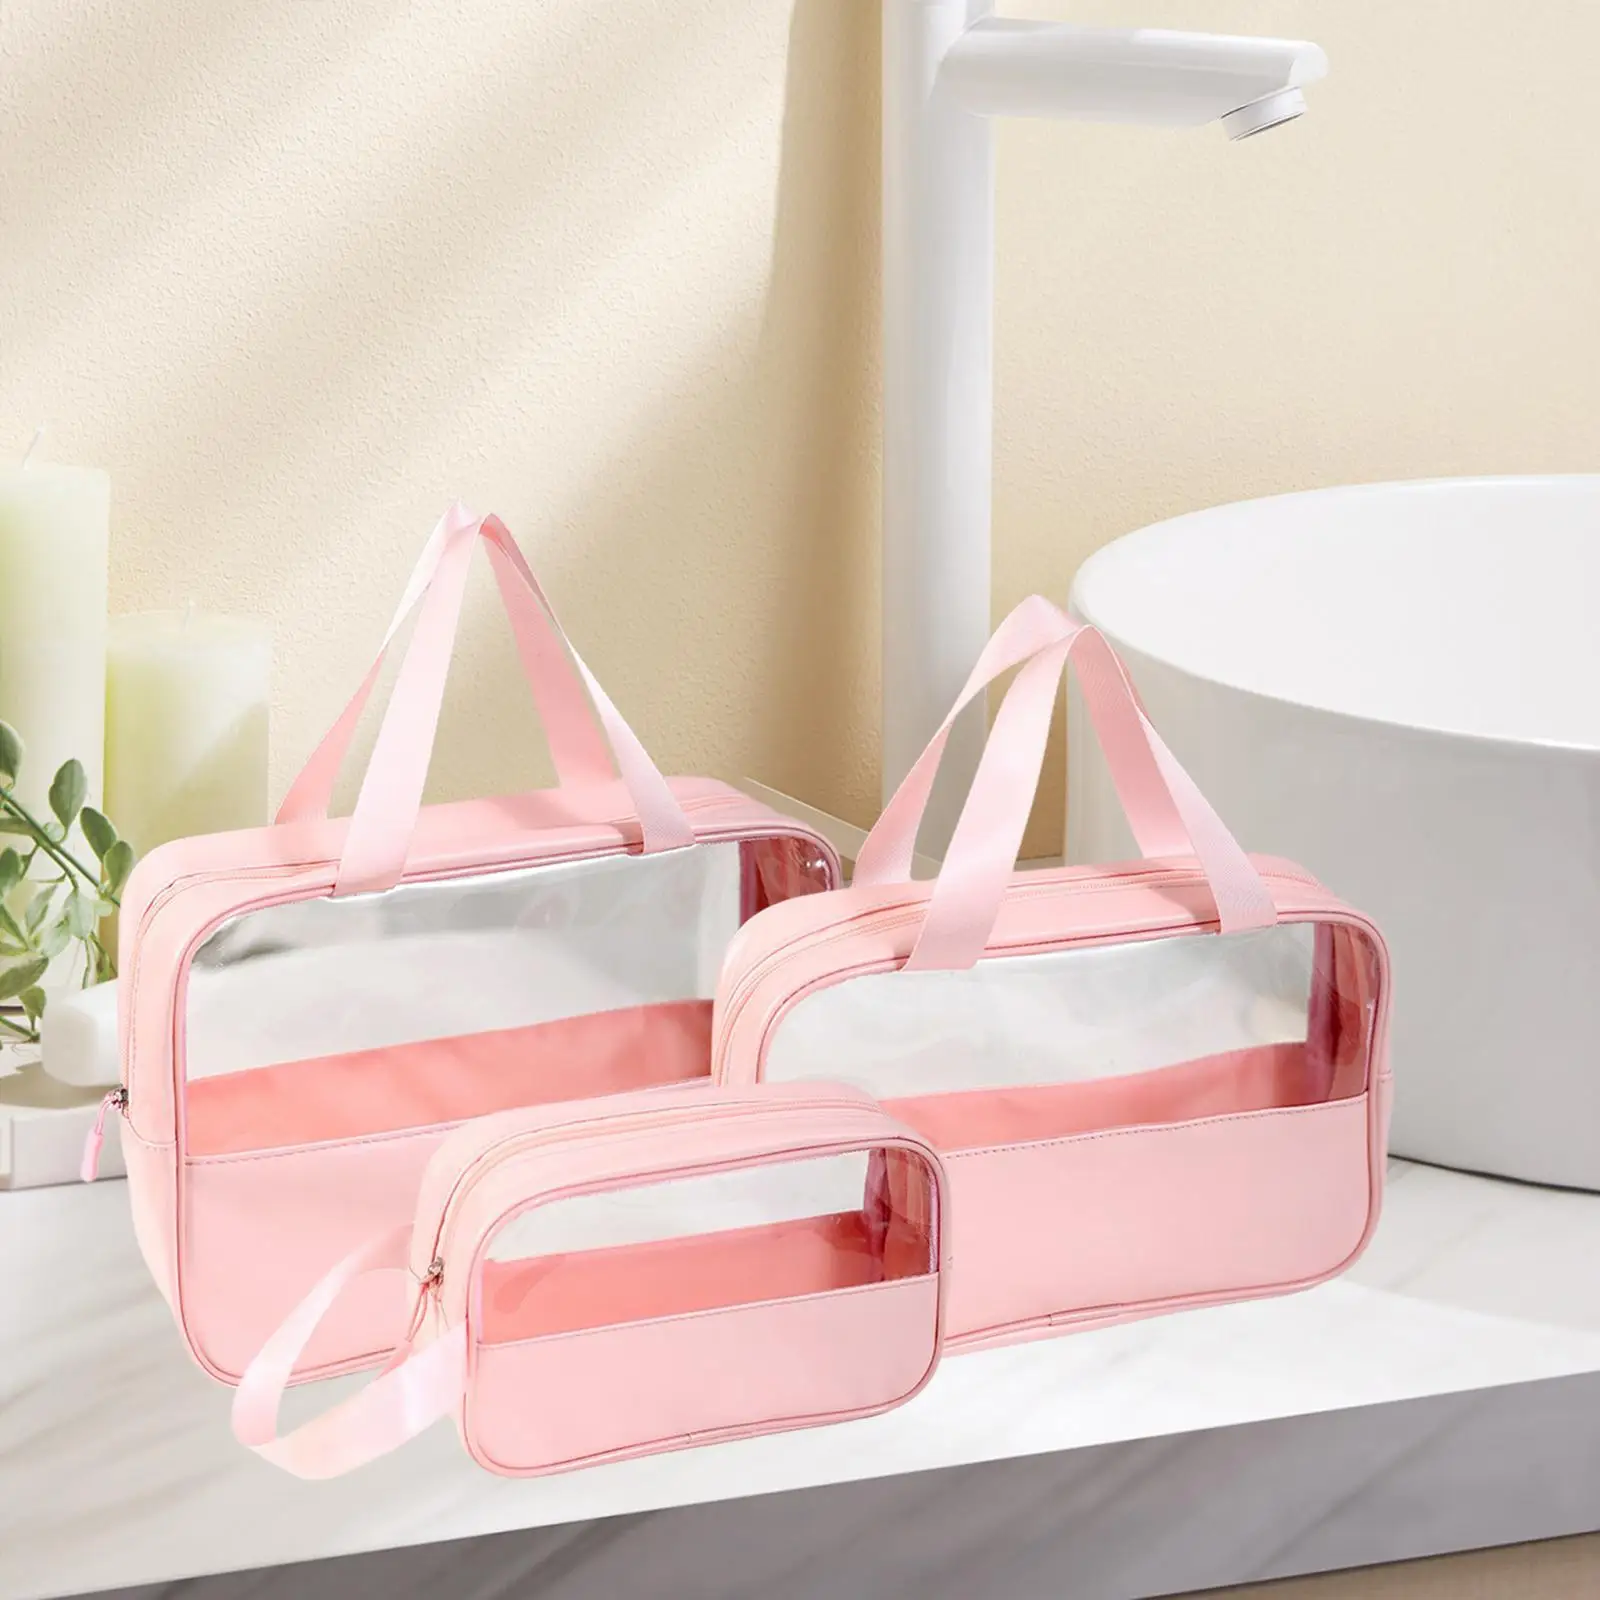 3Pcs Clear Makeup Bag Women Cosmetic Bag Organizer Portable Storage Bag with Zipper Clear Travel Bag Multifunction Toiletry Bag